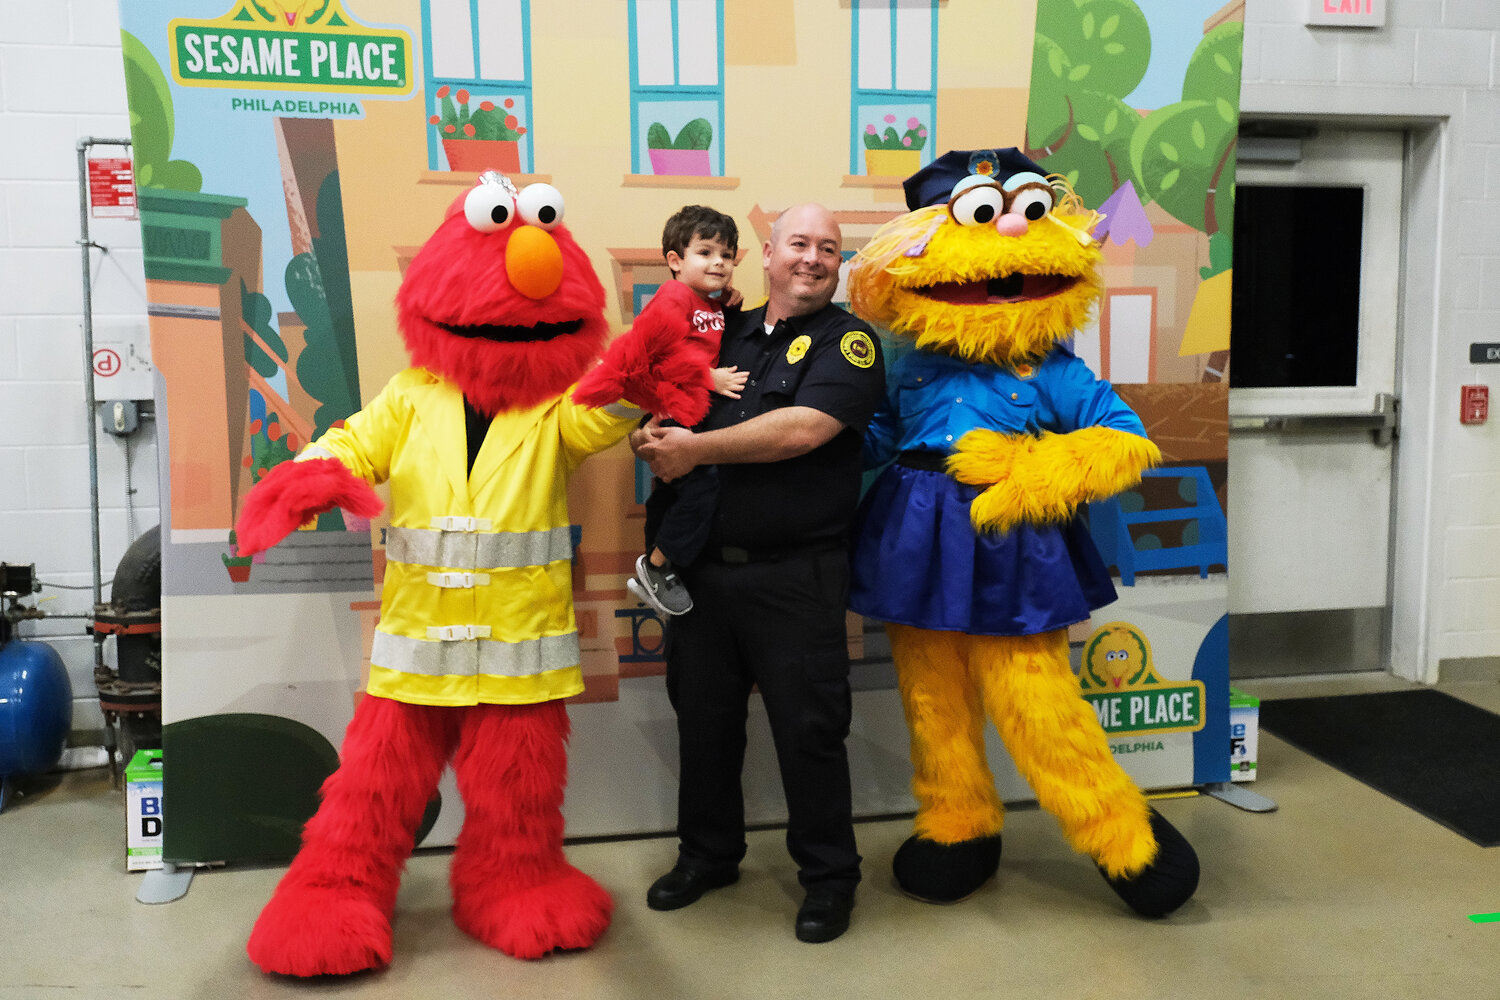 Pat McWilliams, with his 3-year-old son Declan, poses with Elm and Zoe, from Sesame Place.